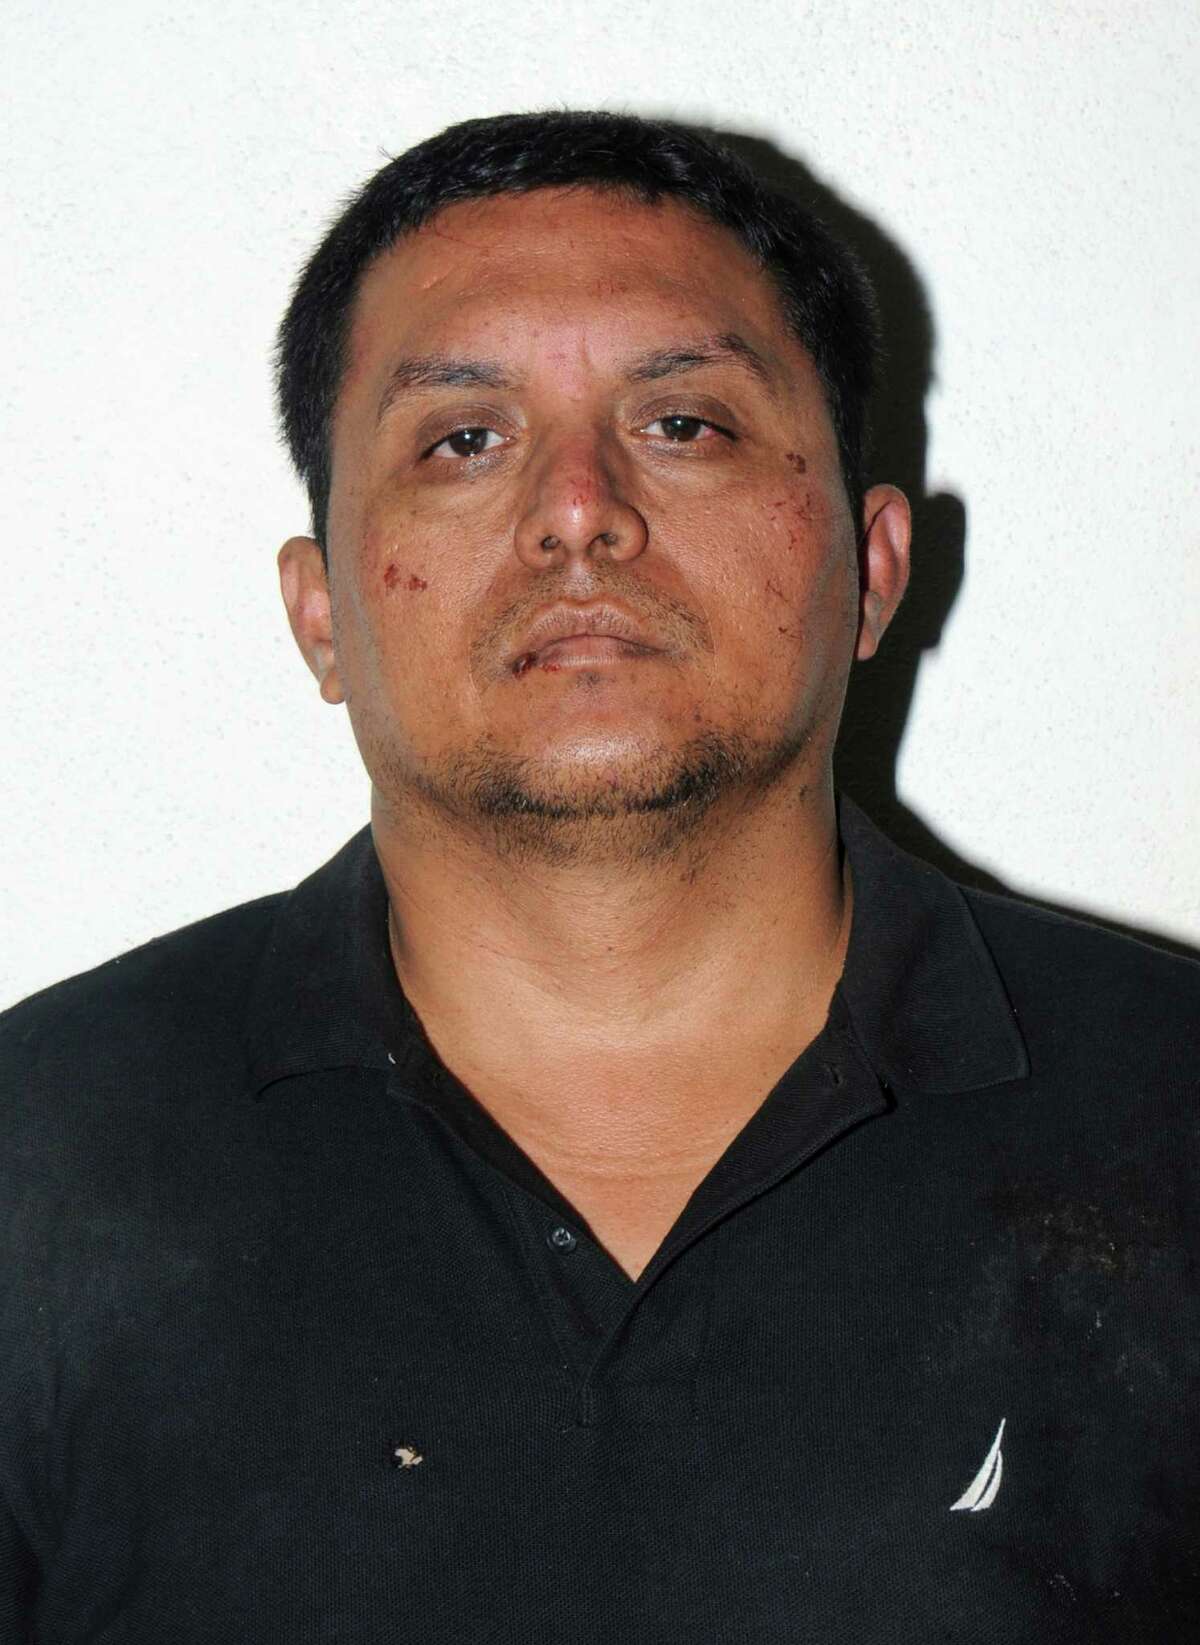 This handout photo released by the Mexican Navy SEMAR on July 16, 2013, shows Miguel Angel Treviño Morales, then head of the Zetas, after he was captured near the Texas border.